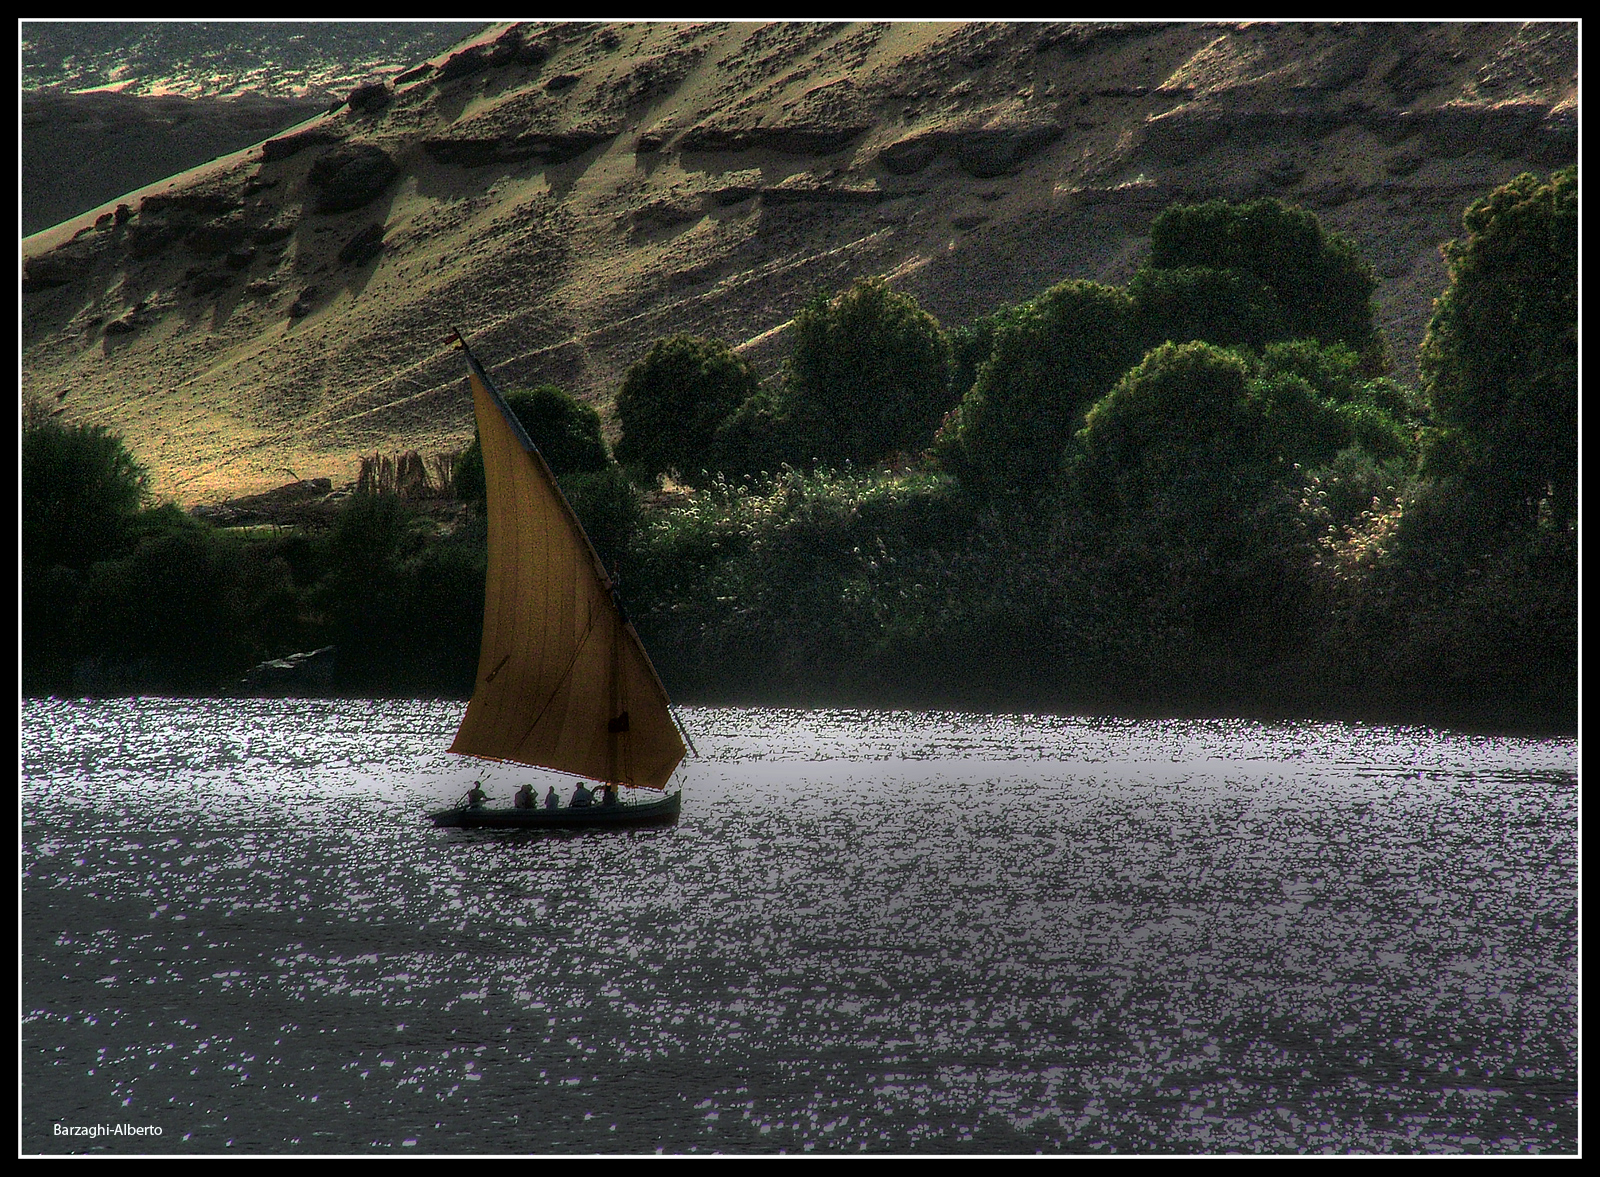 backlight on the Nile...